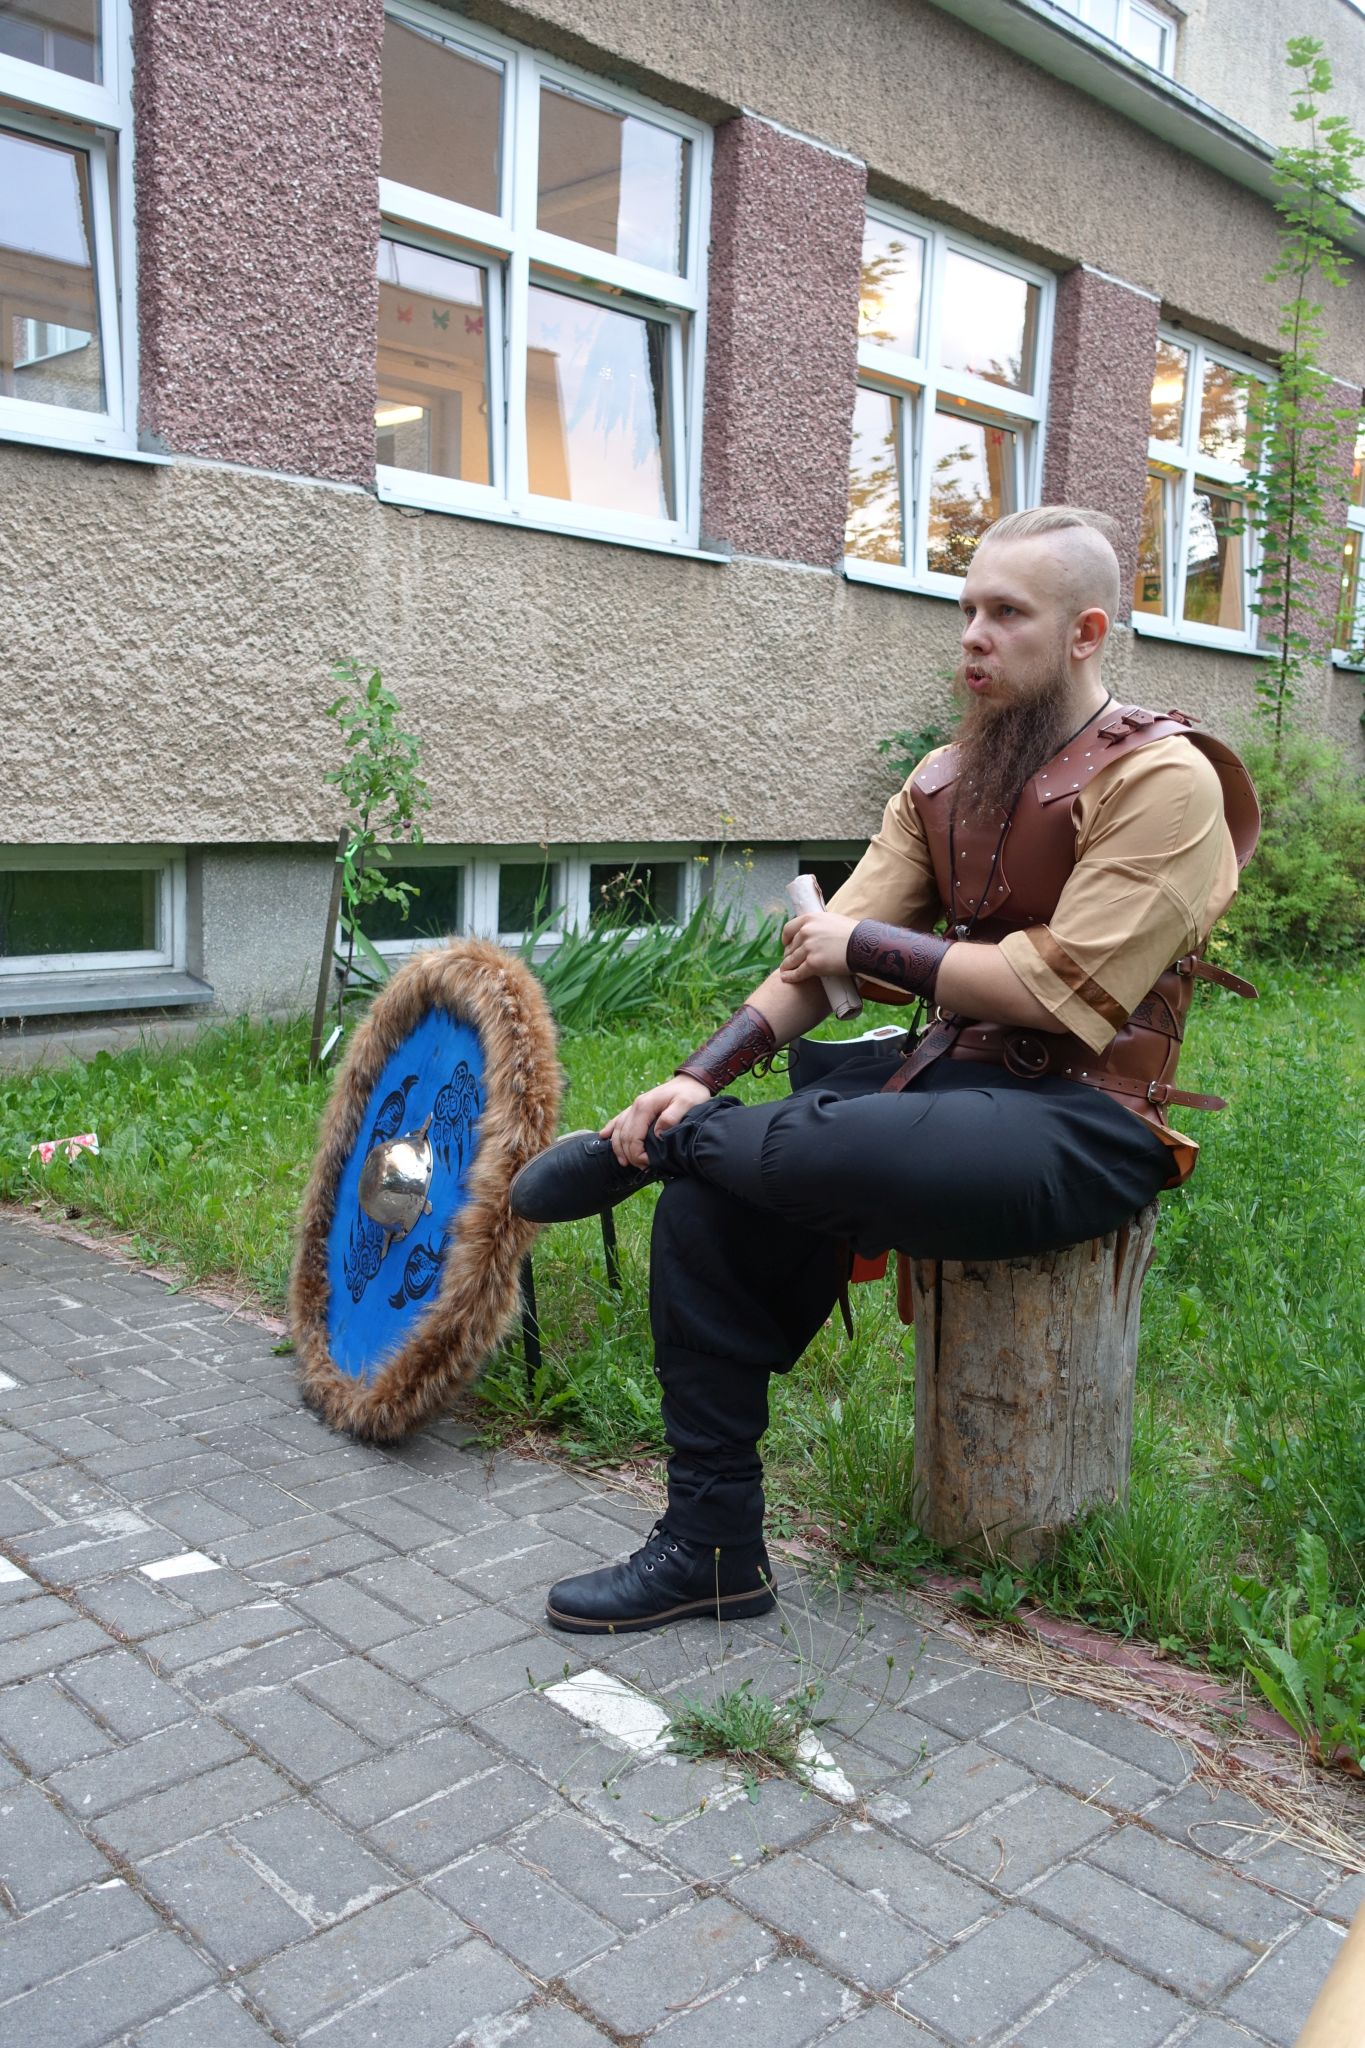 Man dressed in a wooden armor sits on a stump. Next to him there is a round, blue shield.